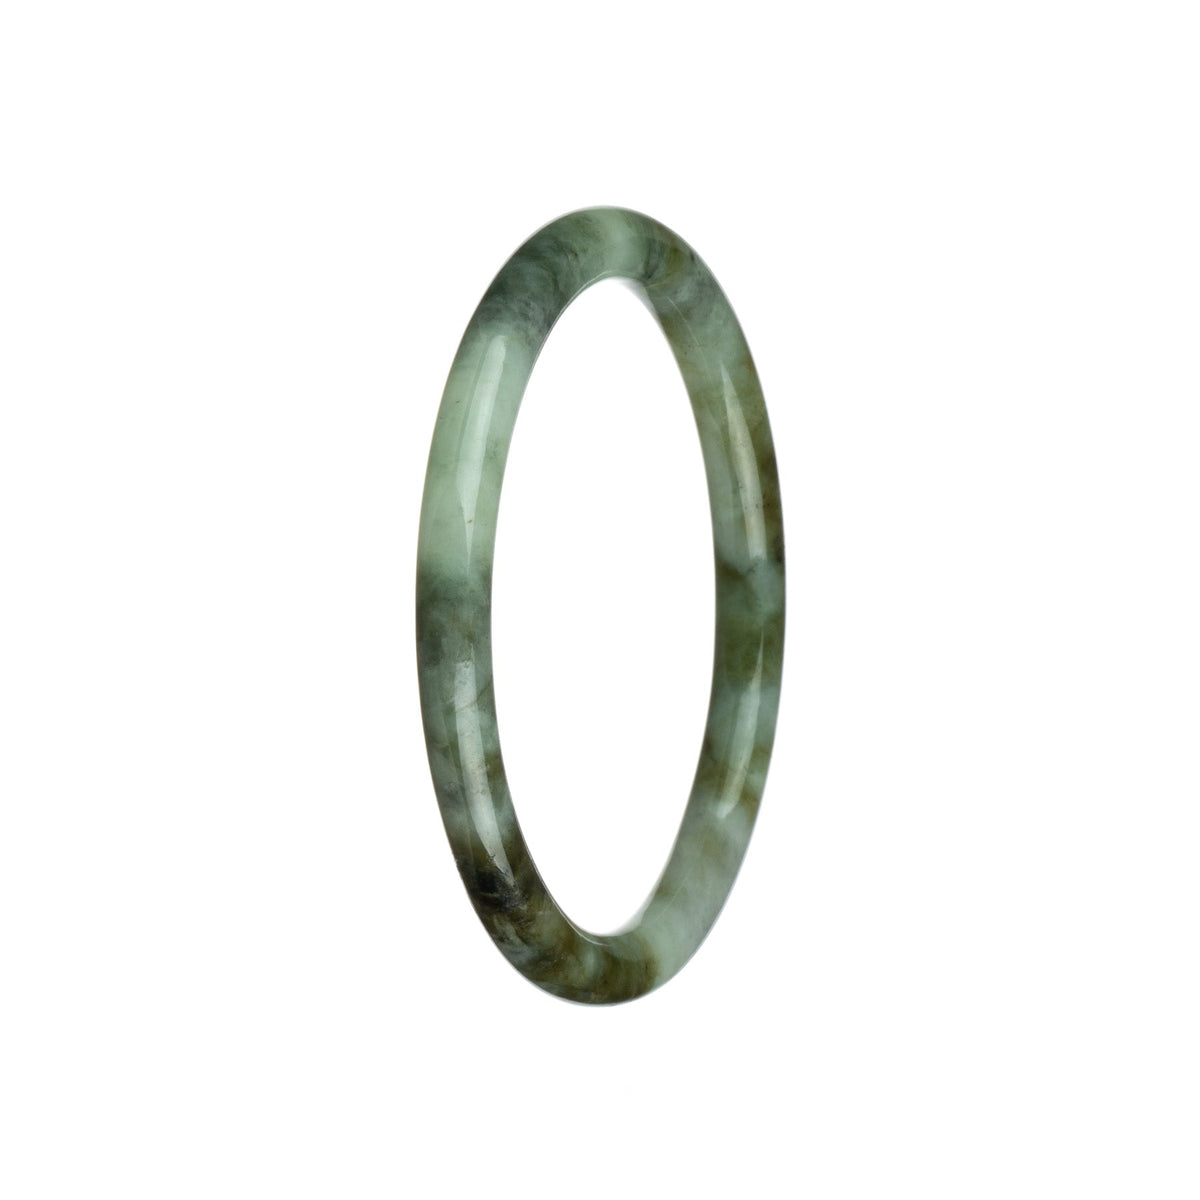 Genuine Natural Pale Green and Brown Pattern Traditional Jade Bangle Bracelet - 61mm Petite Round